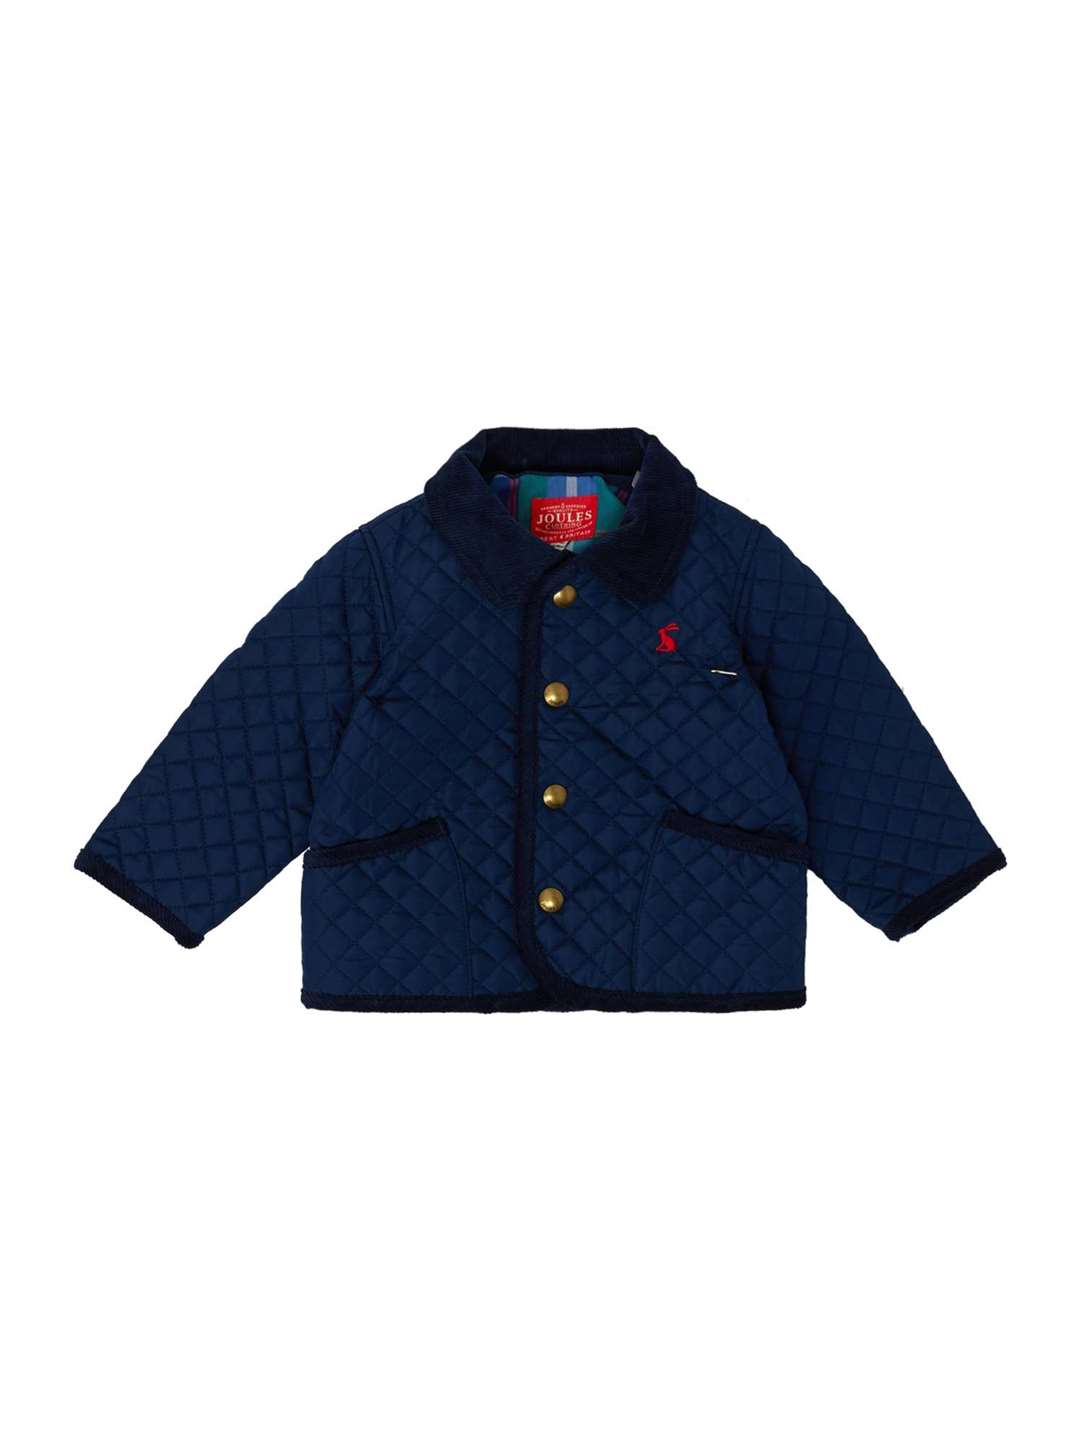 Joules Baby Boy Popper Front Coat, 0 - 12 months, £34.95, House of Fraser